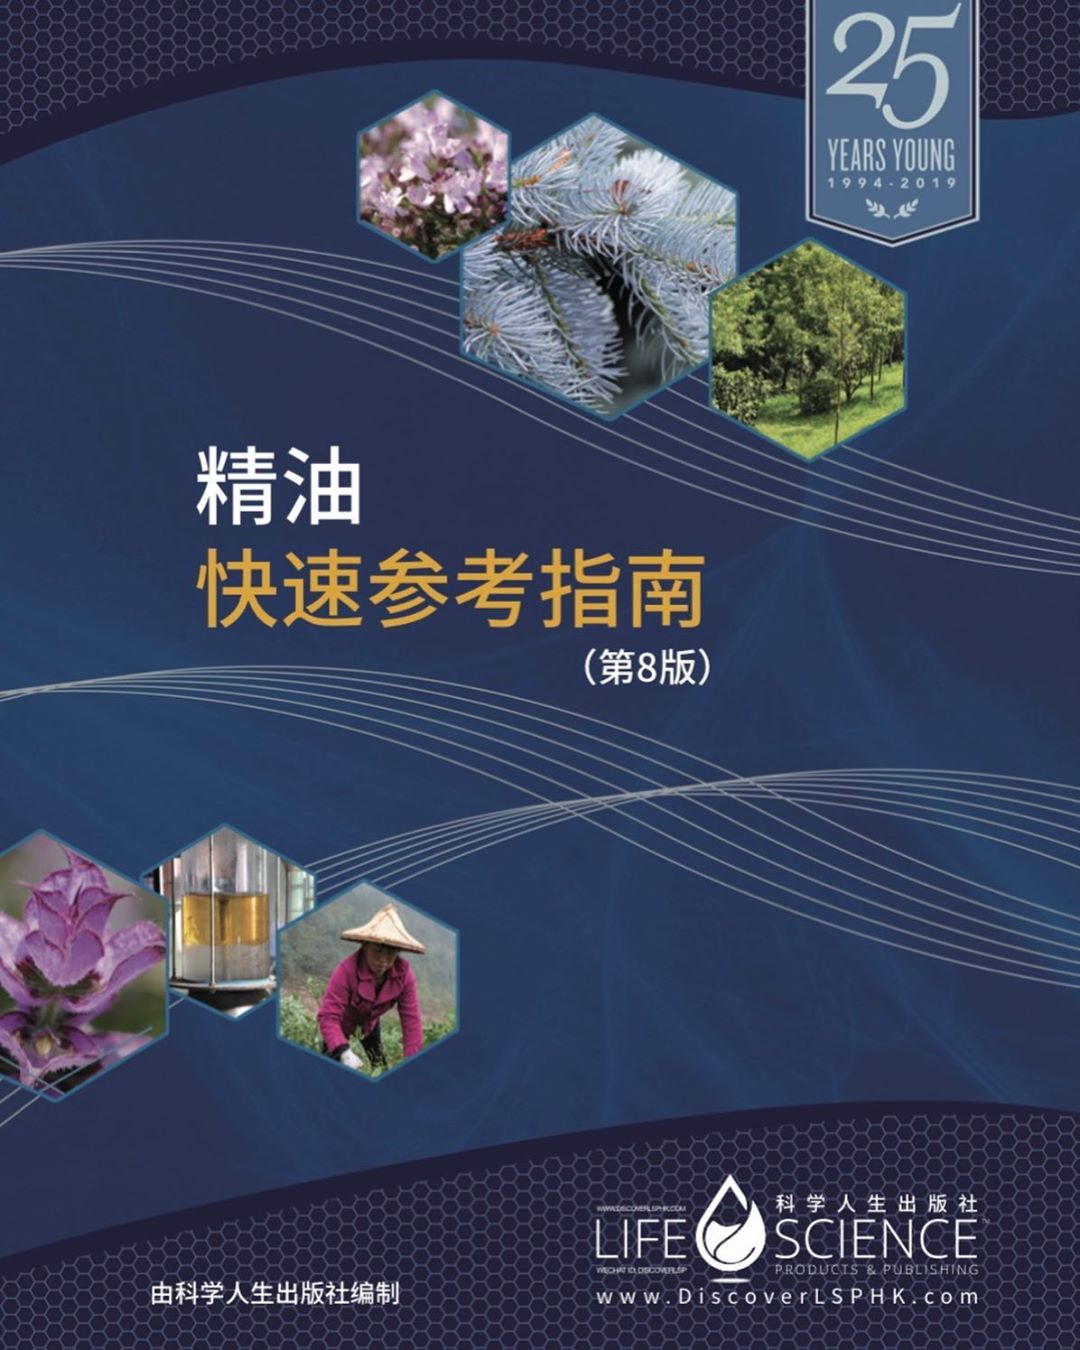 8th Edition Essential Oil Quick Reference Guide (Simplified Chinese) - Discover Health & Lifestyle Asia